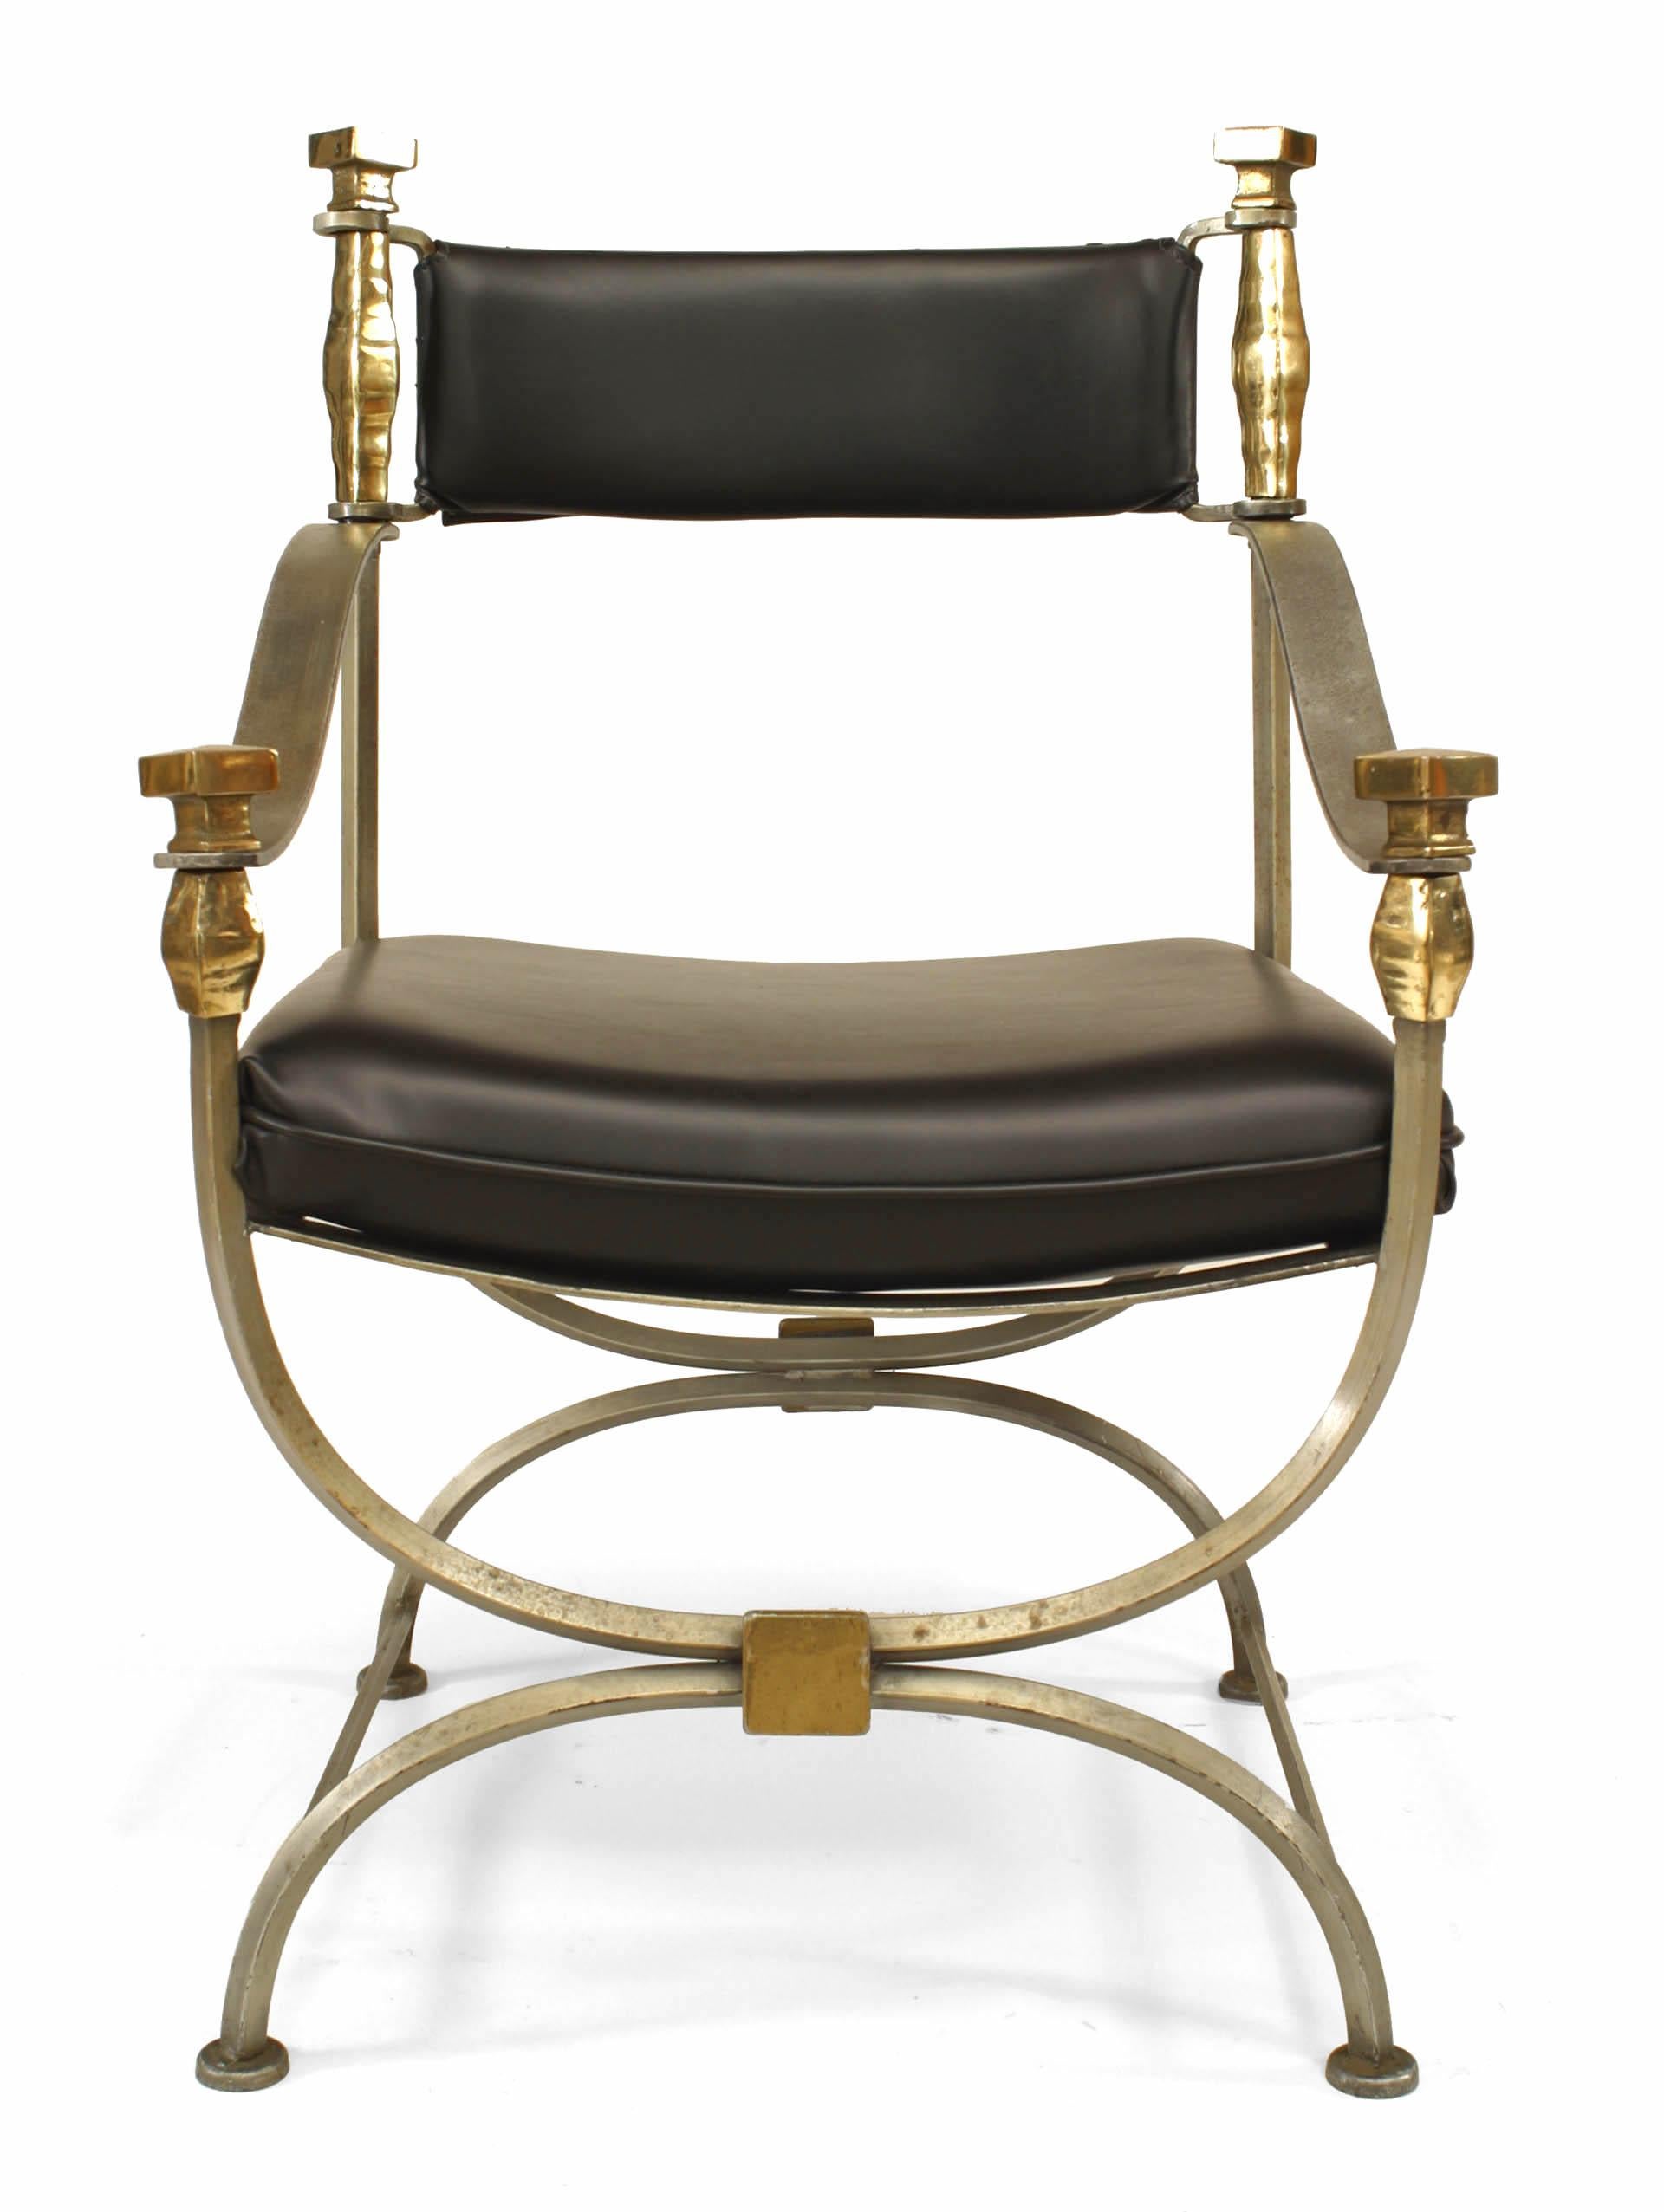 French Mid-Century Modern Campaign chair inspired by neoclassical design and featuring steel and brass trimmed construction as well as a crossed leg design and leather-upholstered seat and back.

 